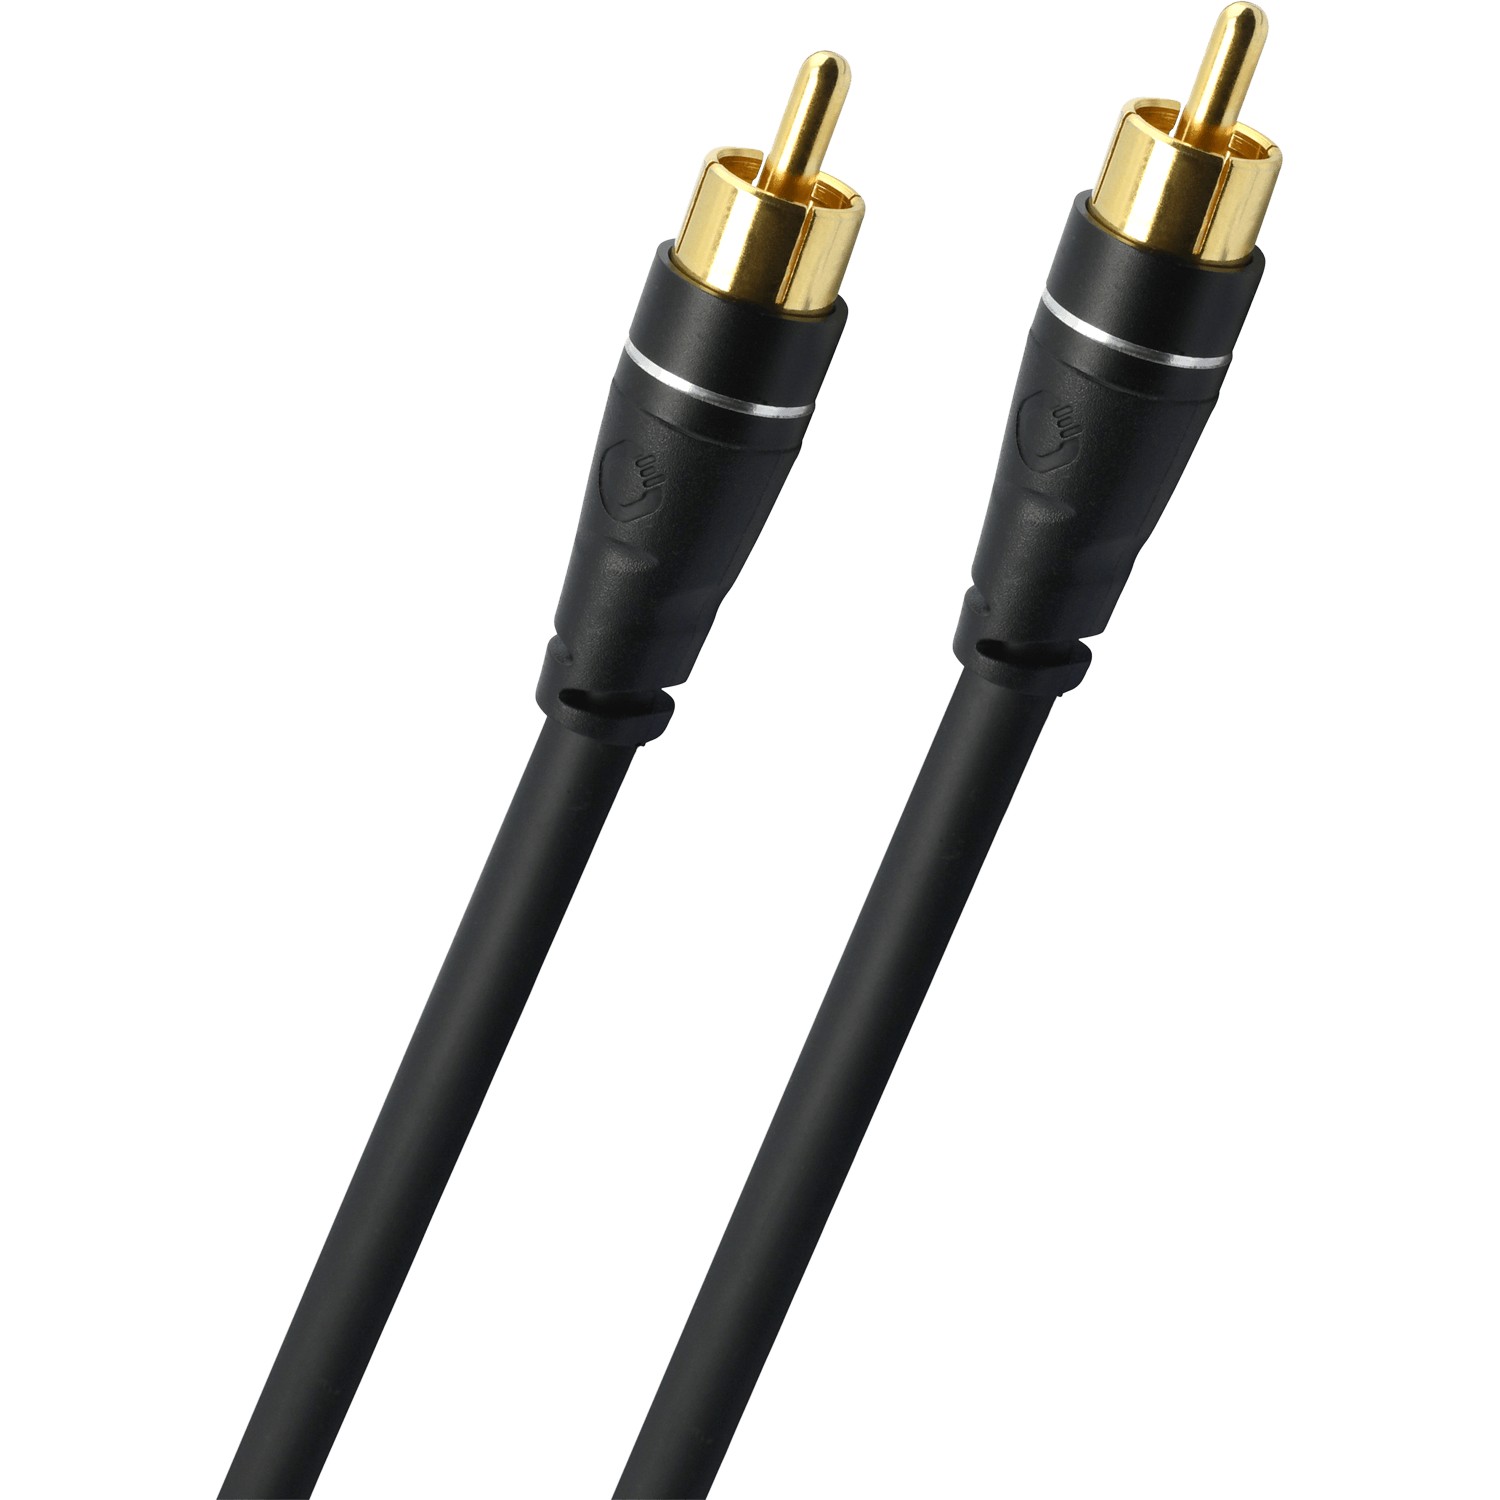 Кабели межблочные аудио Oehlbach EXCELLENCE Sub Link Subwoofer cable 5,0m bw, D1C33162 кабели межблочные аудио oehlbach select audio link cable 3 0m d1c33145